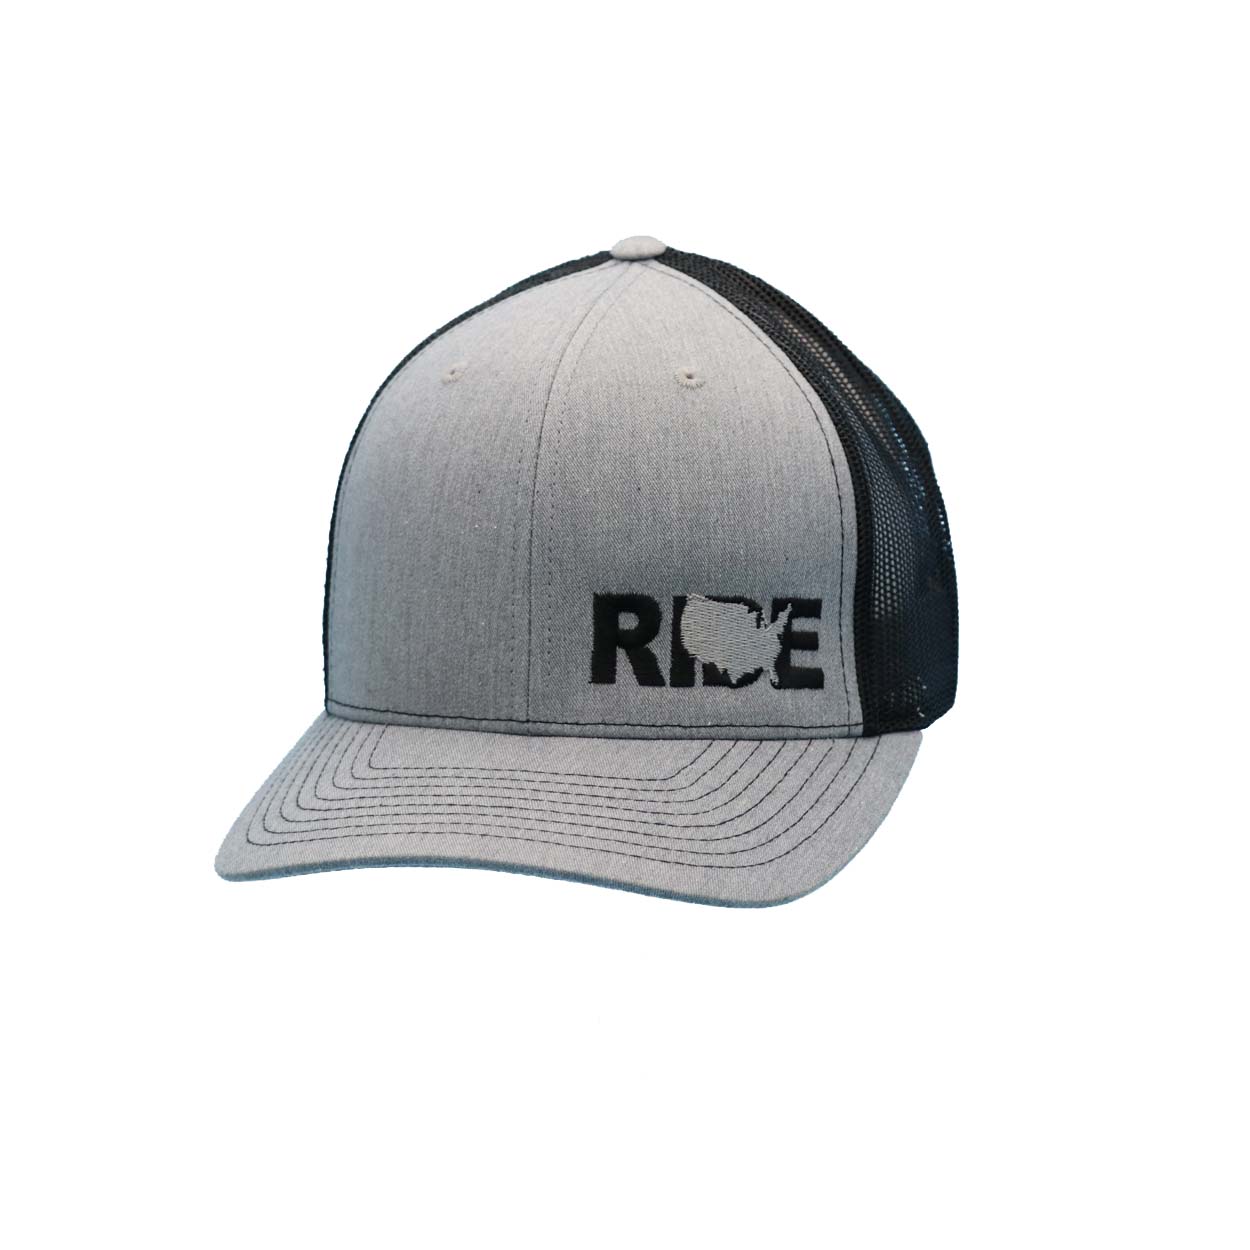 Ride United States Classic Pro Night Out Embroidered Snapback Trucker Hat Heather Gray/Black